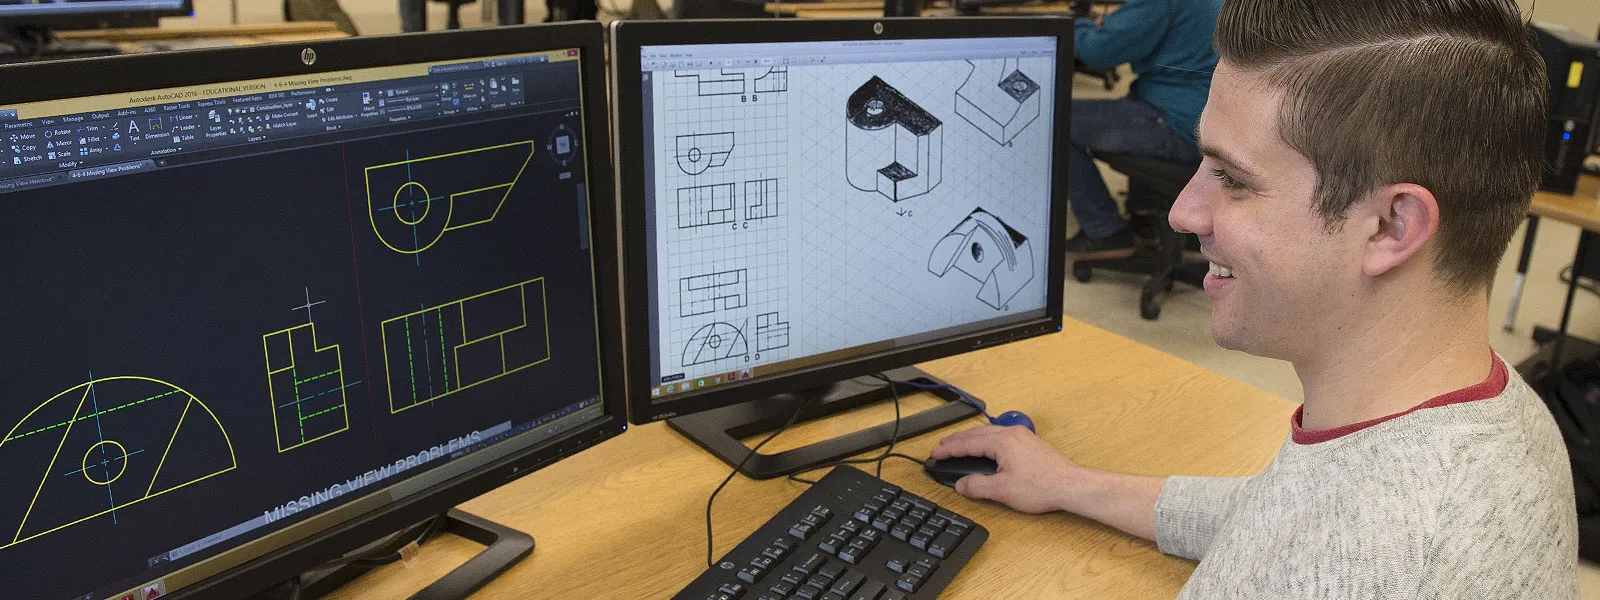 A worker at the desk working on CAD software.